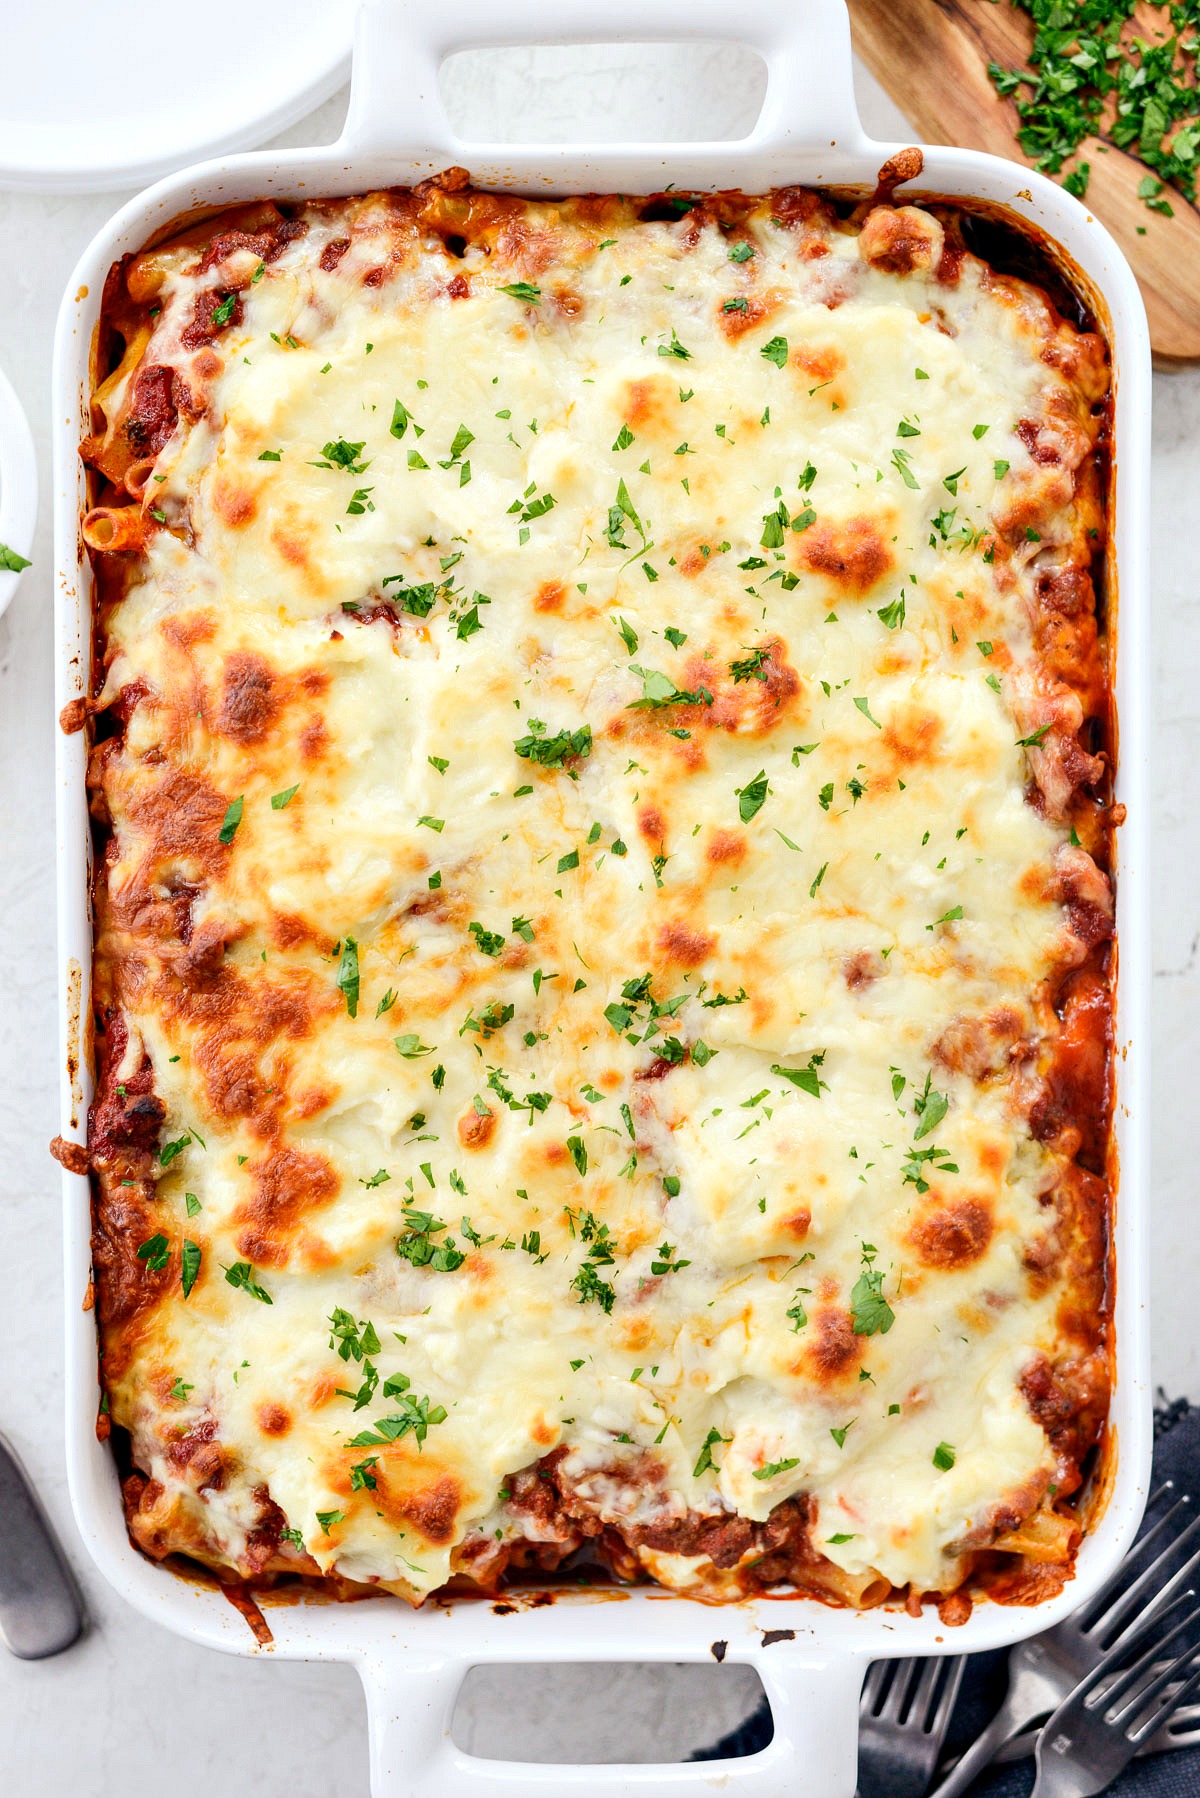 Spicy Italian Sausage Baked Ziti - Simply Scratch